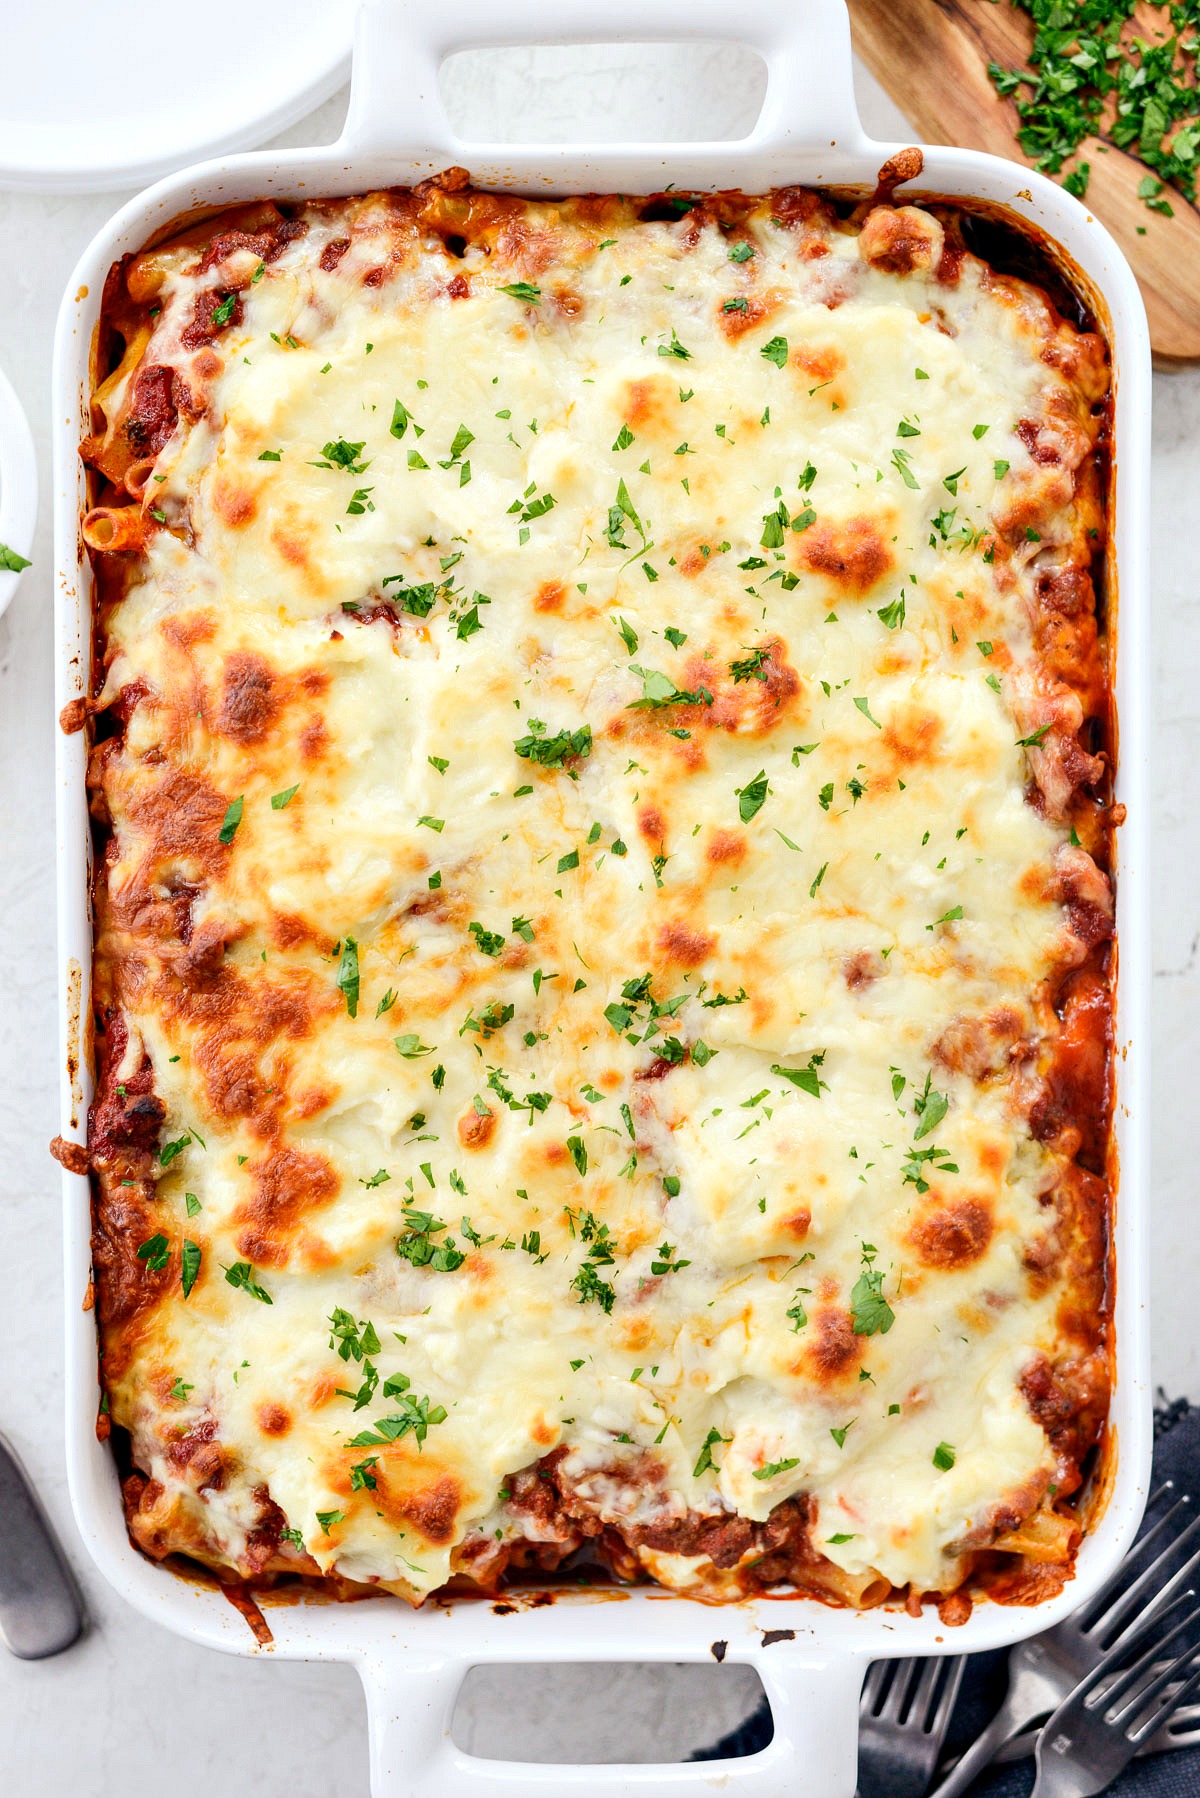 Spicy Italian Sausage Baked Ziti - Simply Scratch